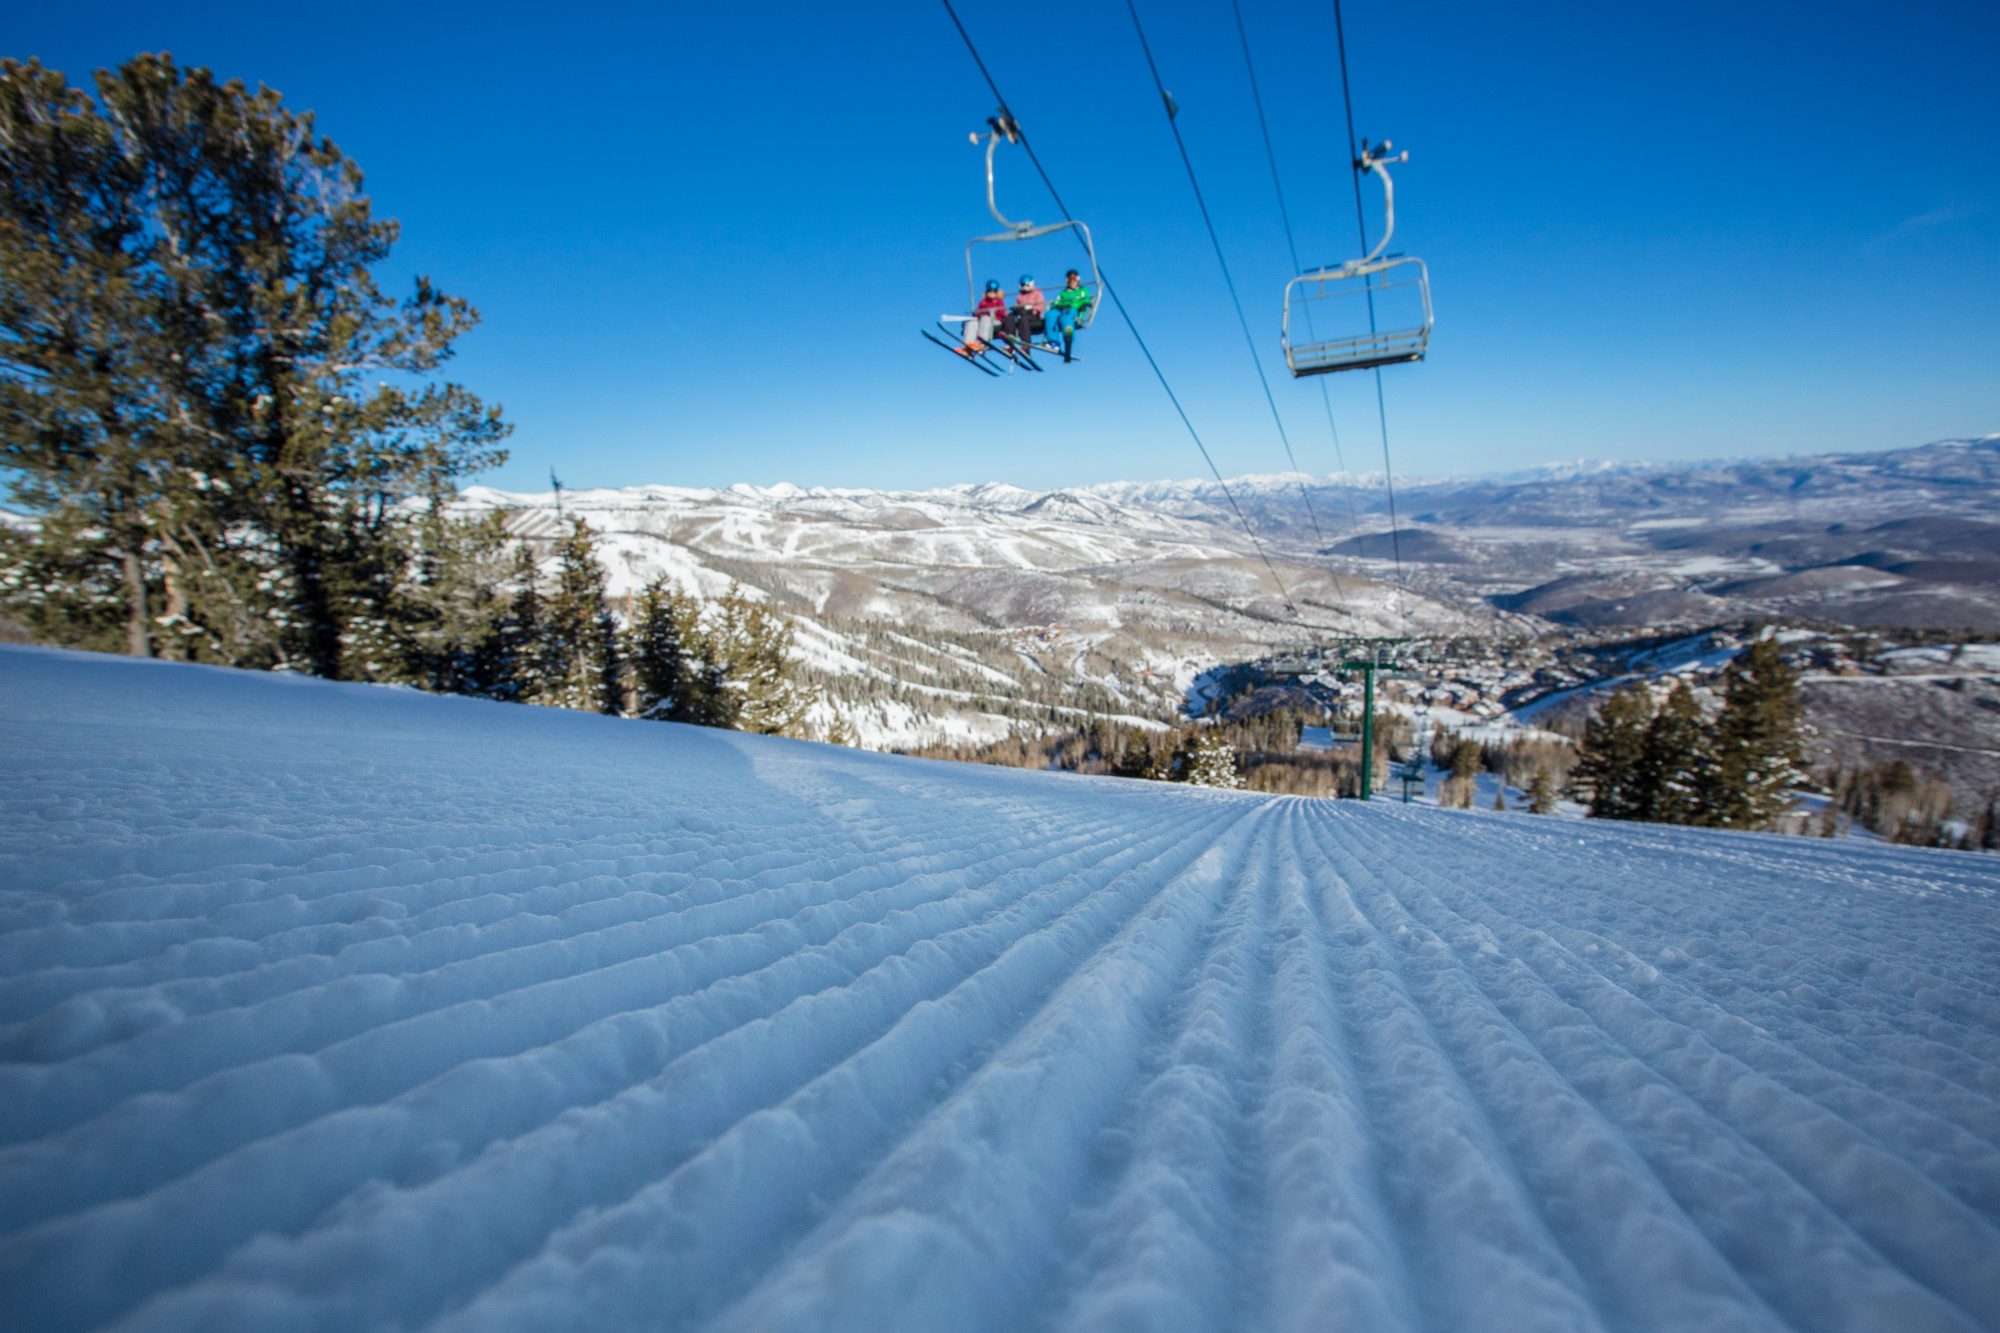 First chair in the winter. Photo: Deer Valley Resort. Deer Valley who was awarded Best US Ski Resort by the World Ski Awards for the sixth year, opens this Saturday December 8th .